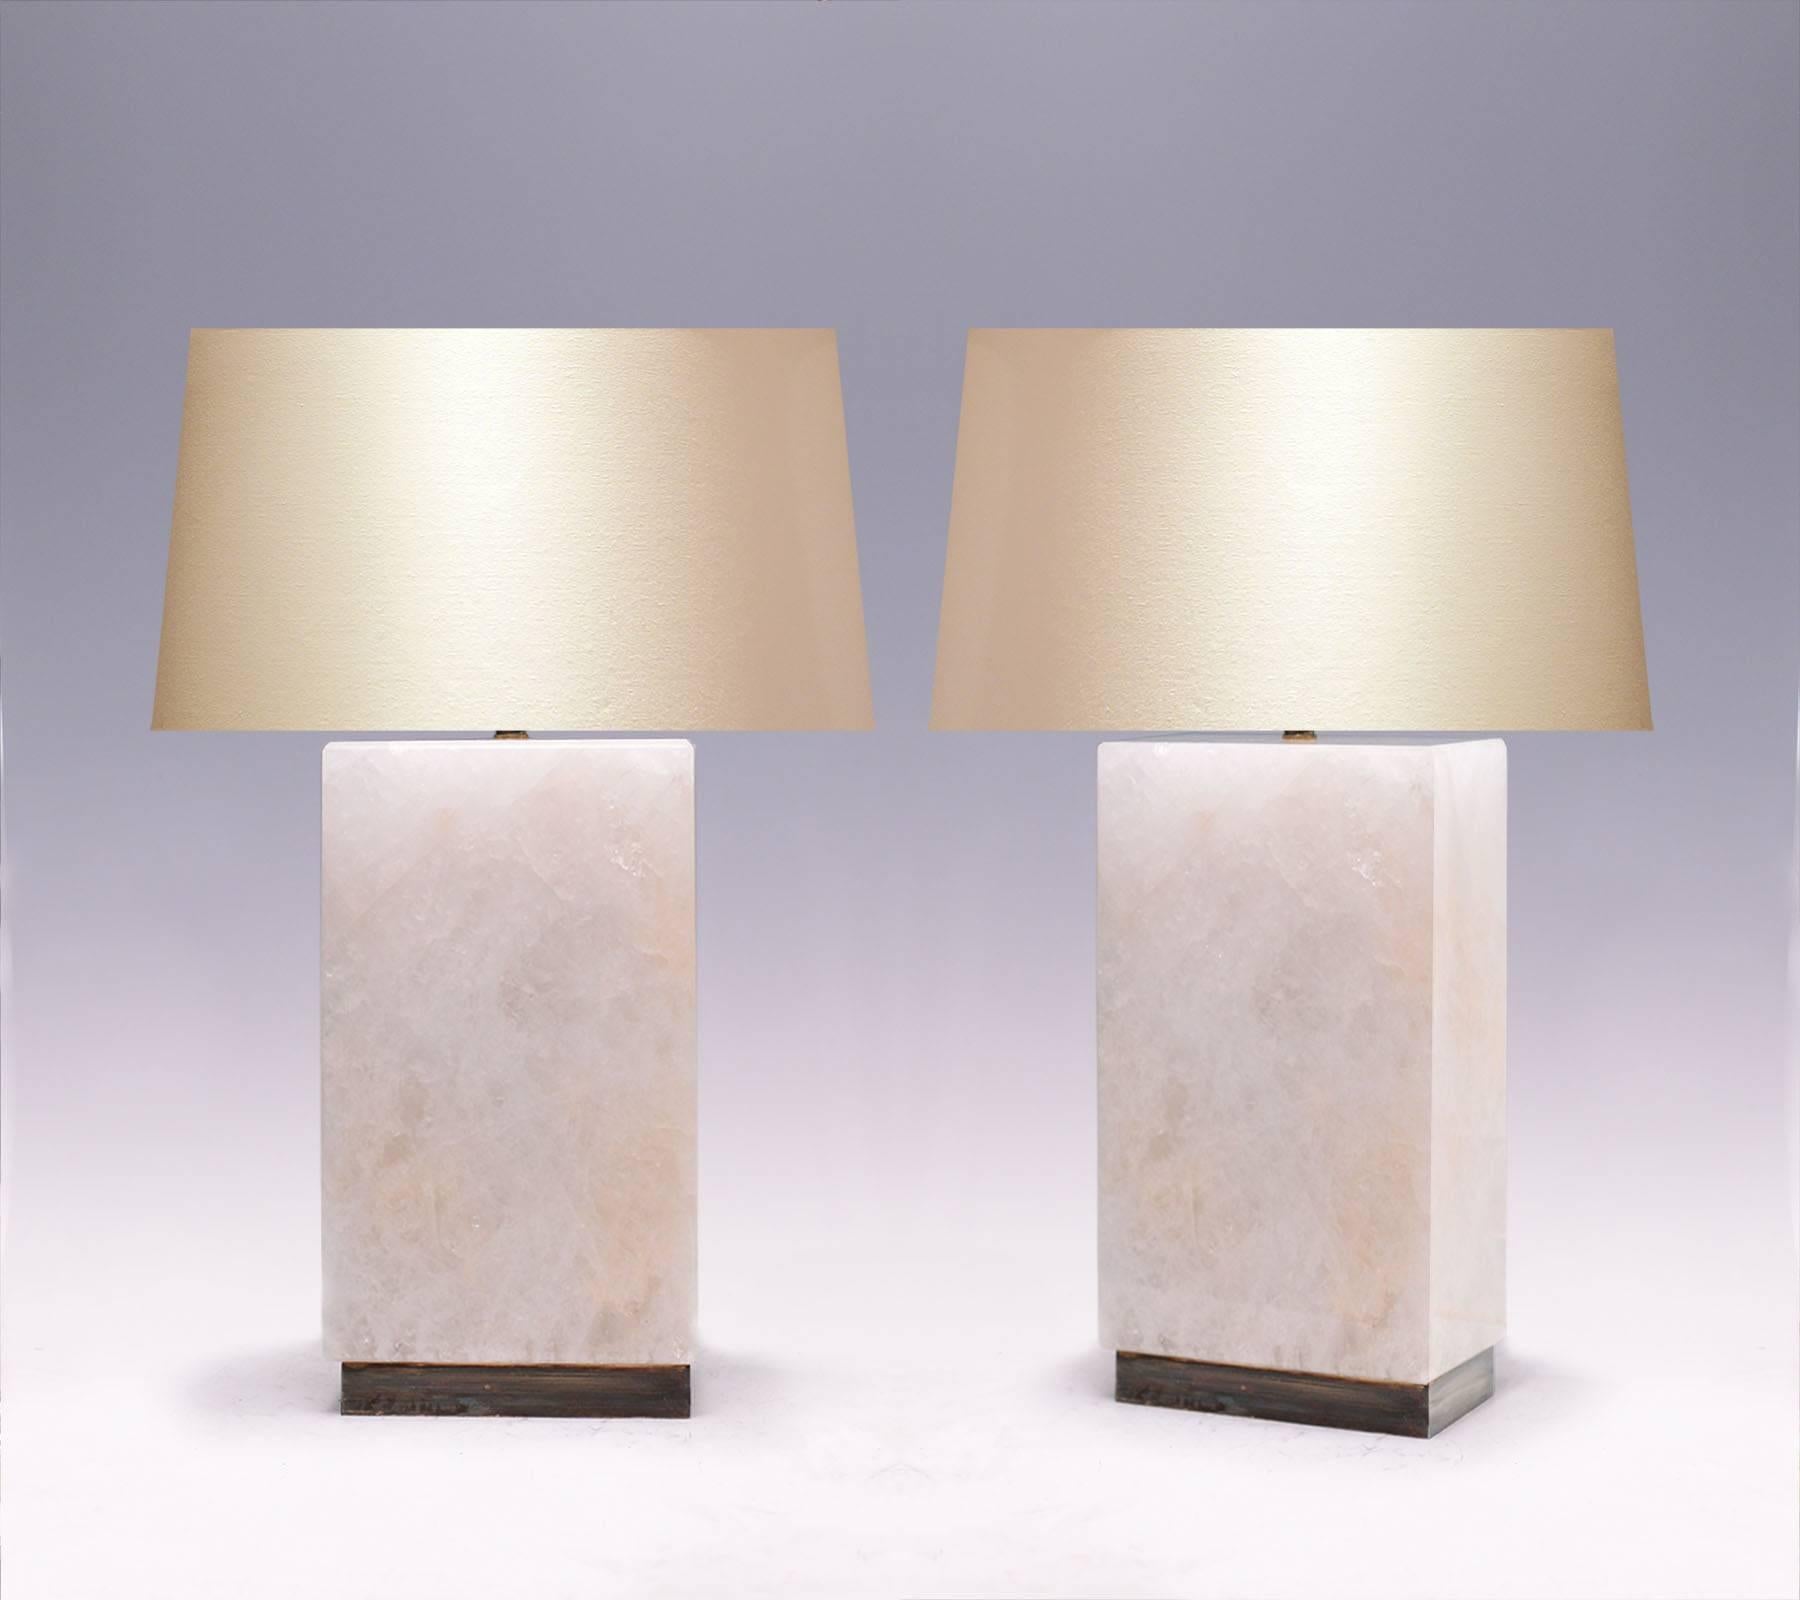 A fine carved block form rock crystal lamp with antique brass base.
Available in nickel plating and polished brass finished.
Measures: To the rock crystal: 12.5